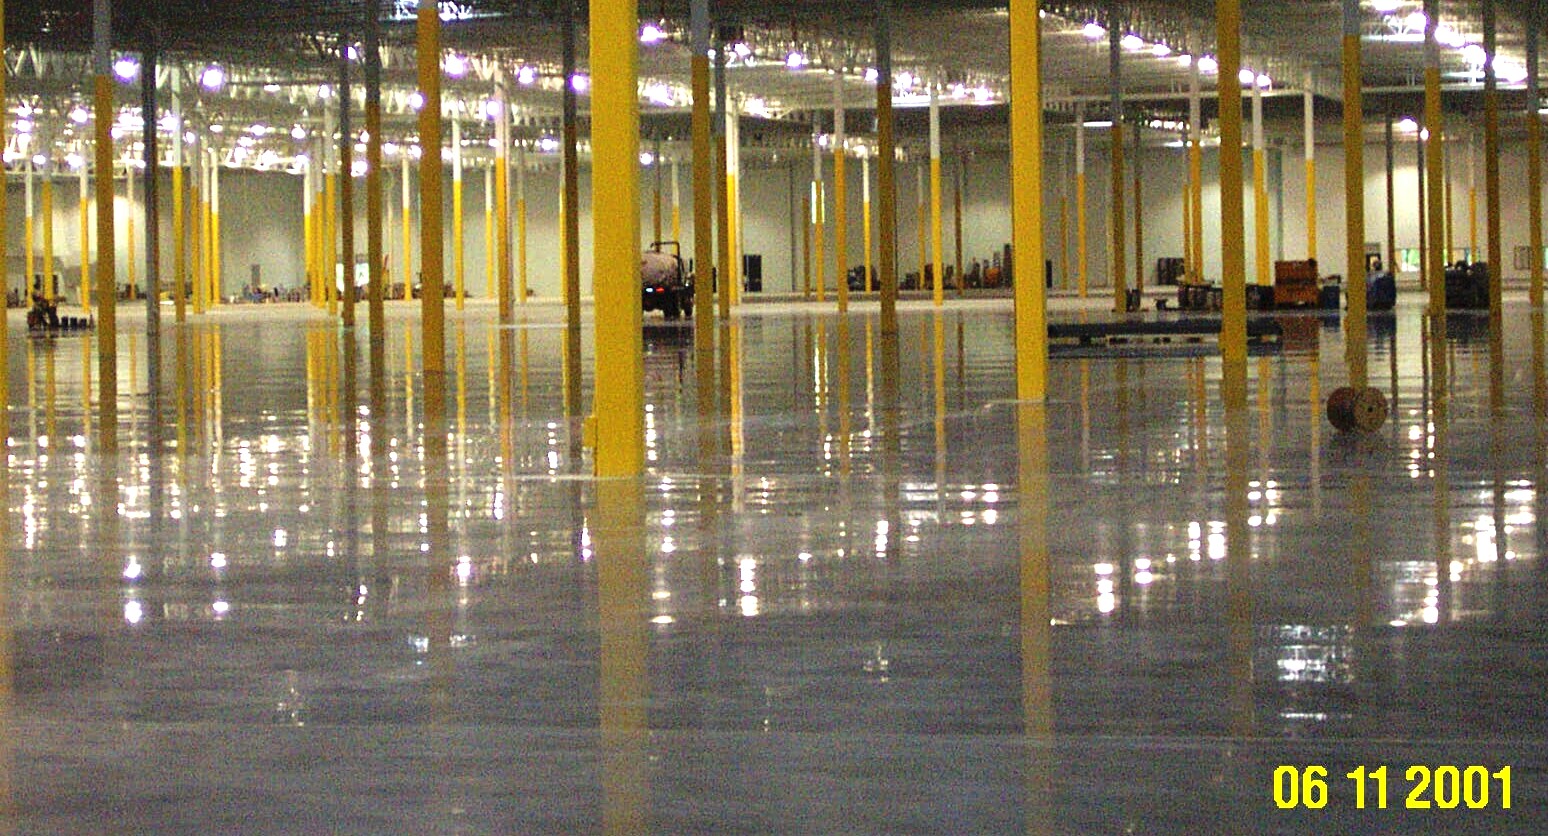 Yellow columns rise from a polished concrete floor in a Volkswagen parts warehouse in WI.